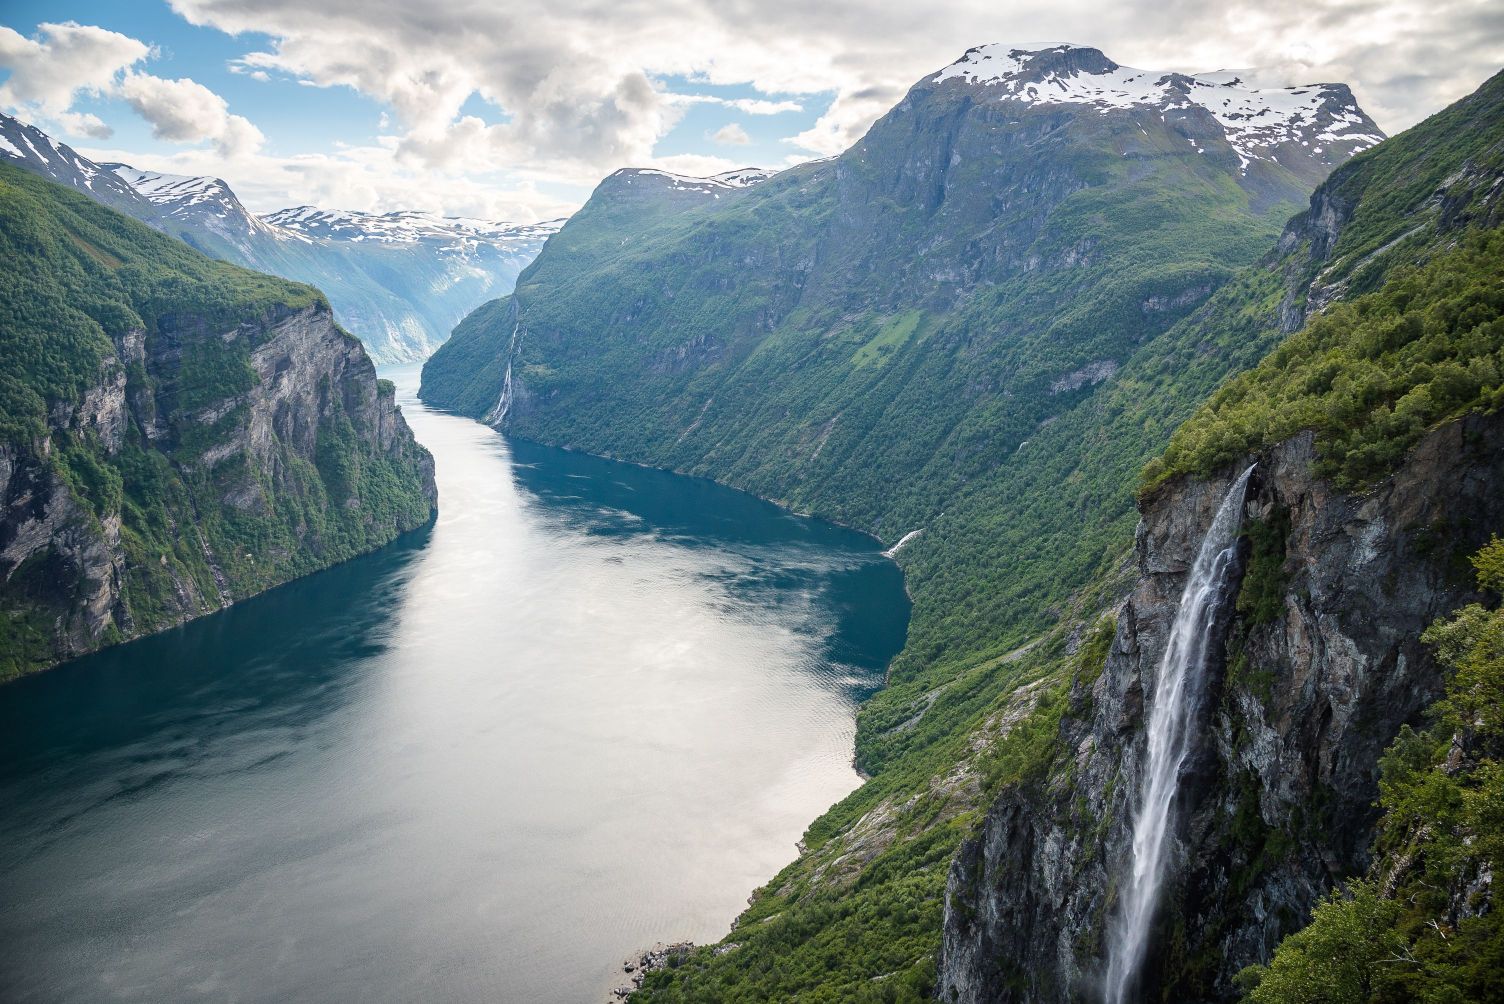 A view of Geirangerfjord from above.